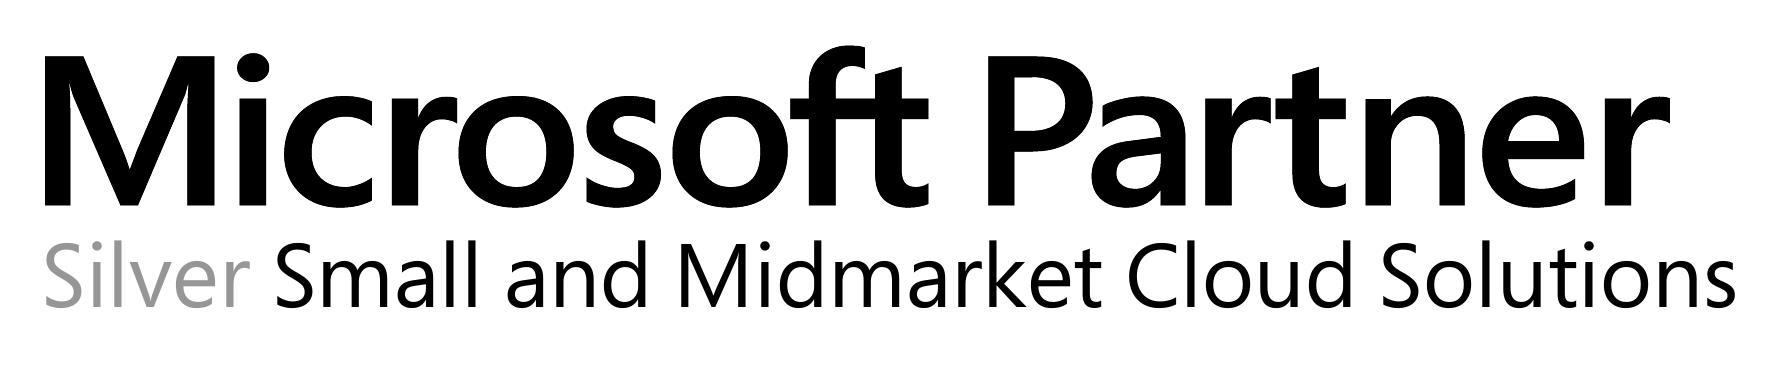 Microsoft Silver Small and Midmarket Cloud Solutions Logo